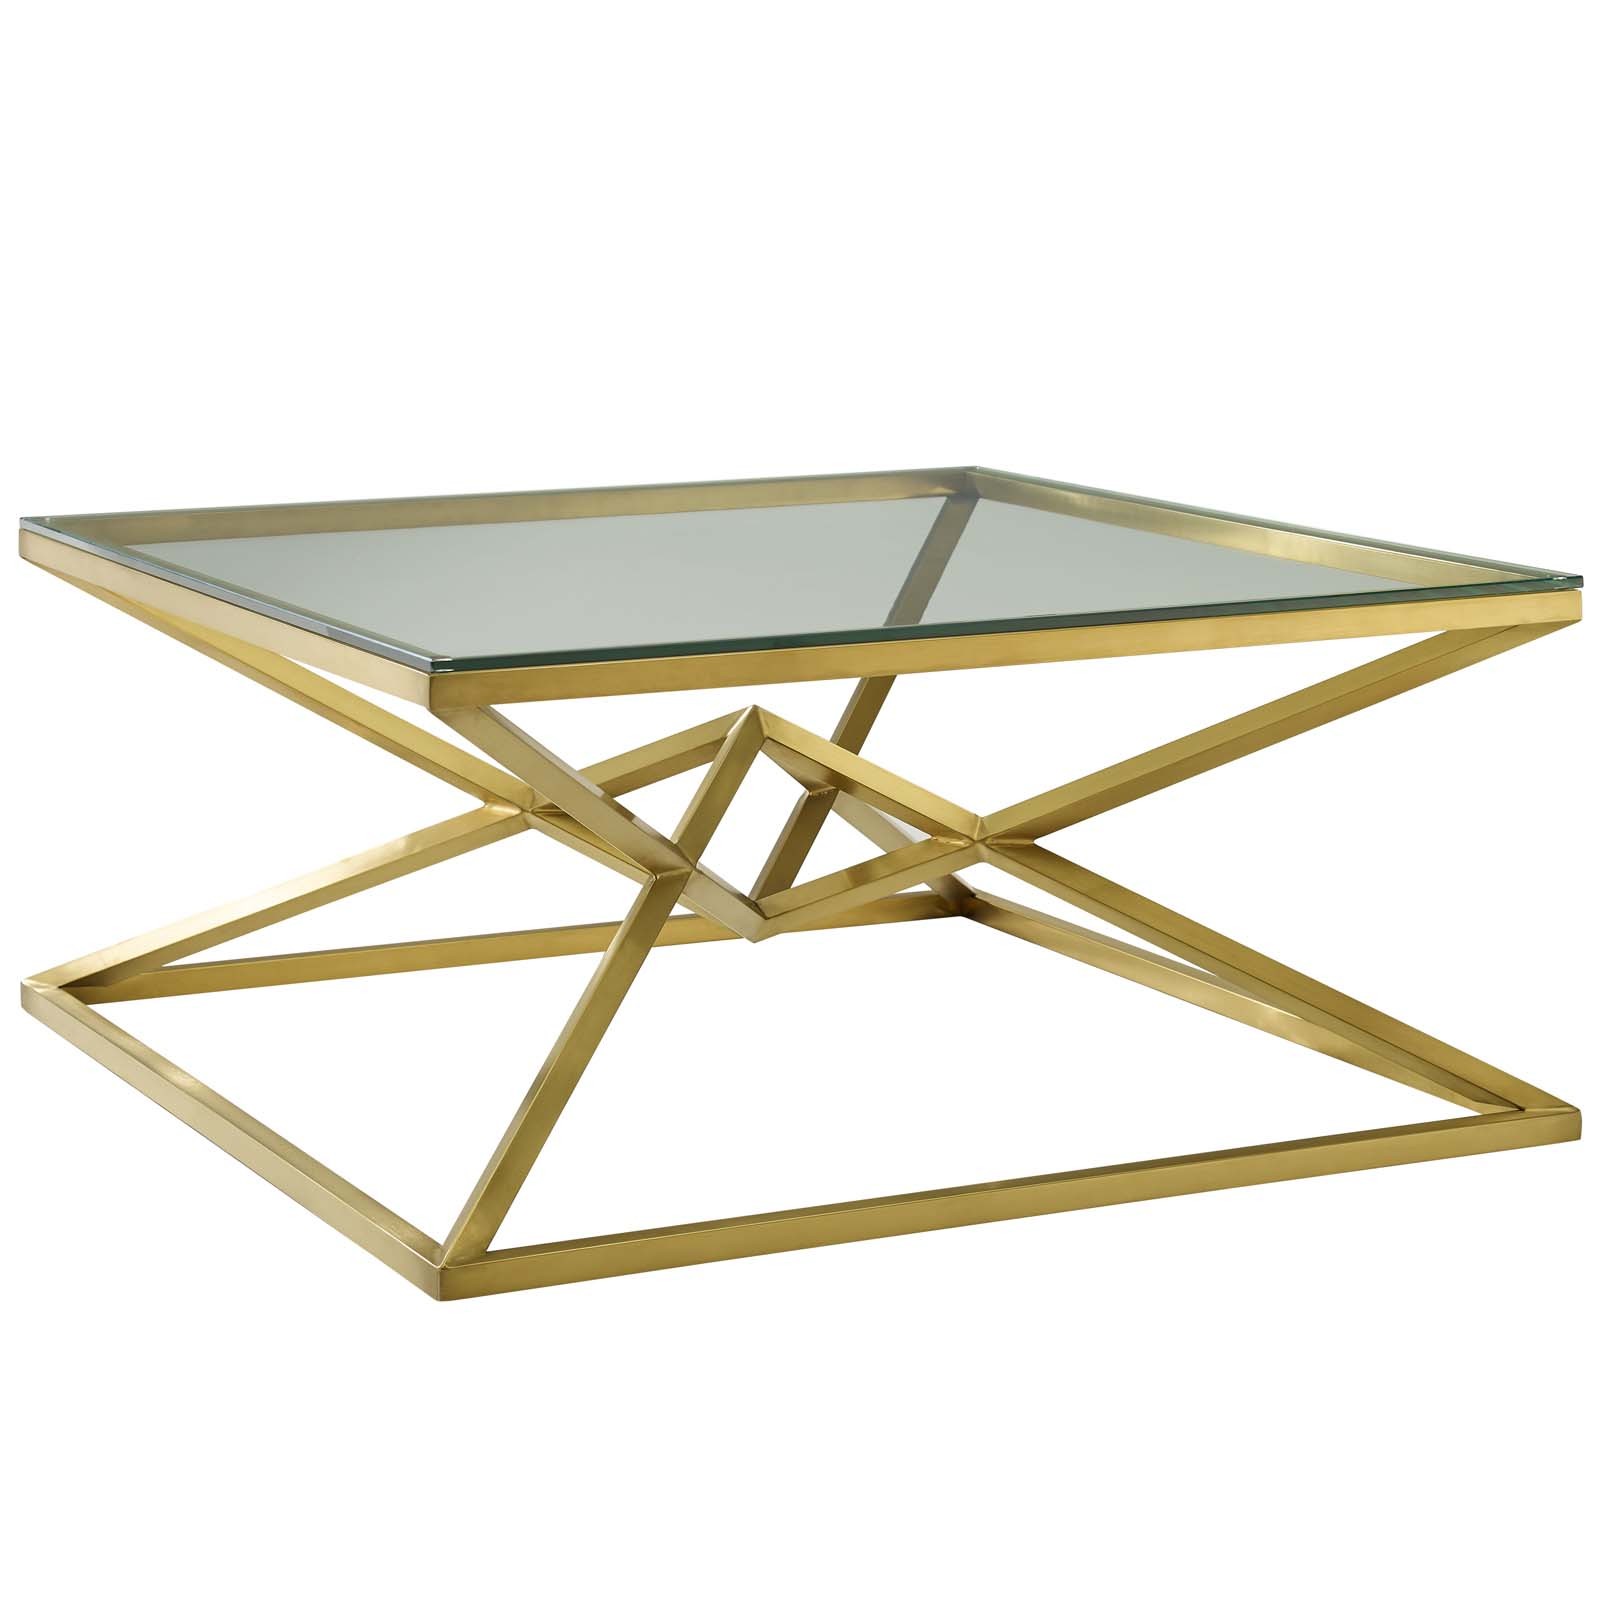 Point 39.5" Brushed Gold Metal Stainless Steel Coffee Table in Gold